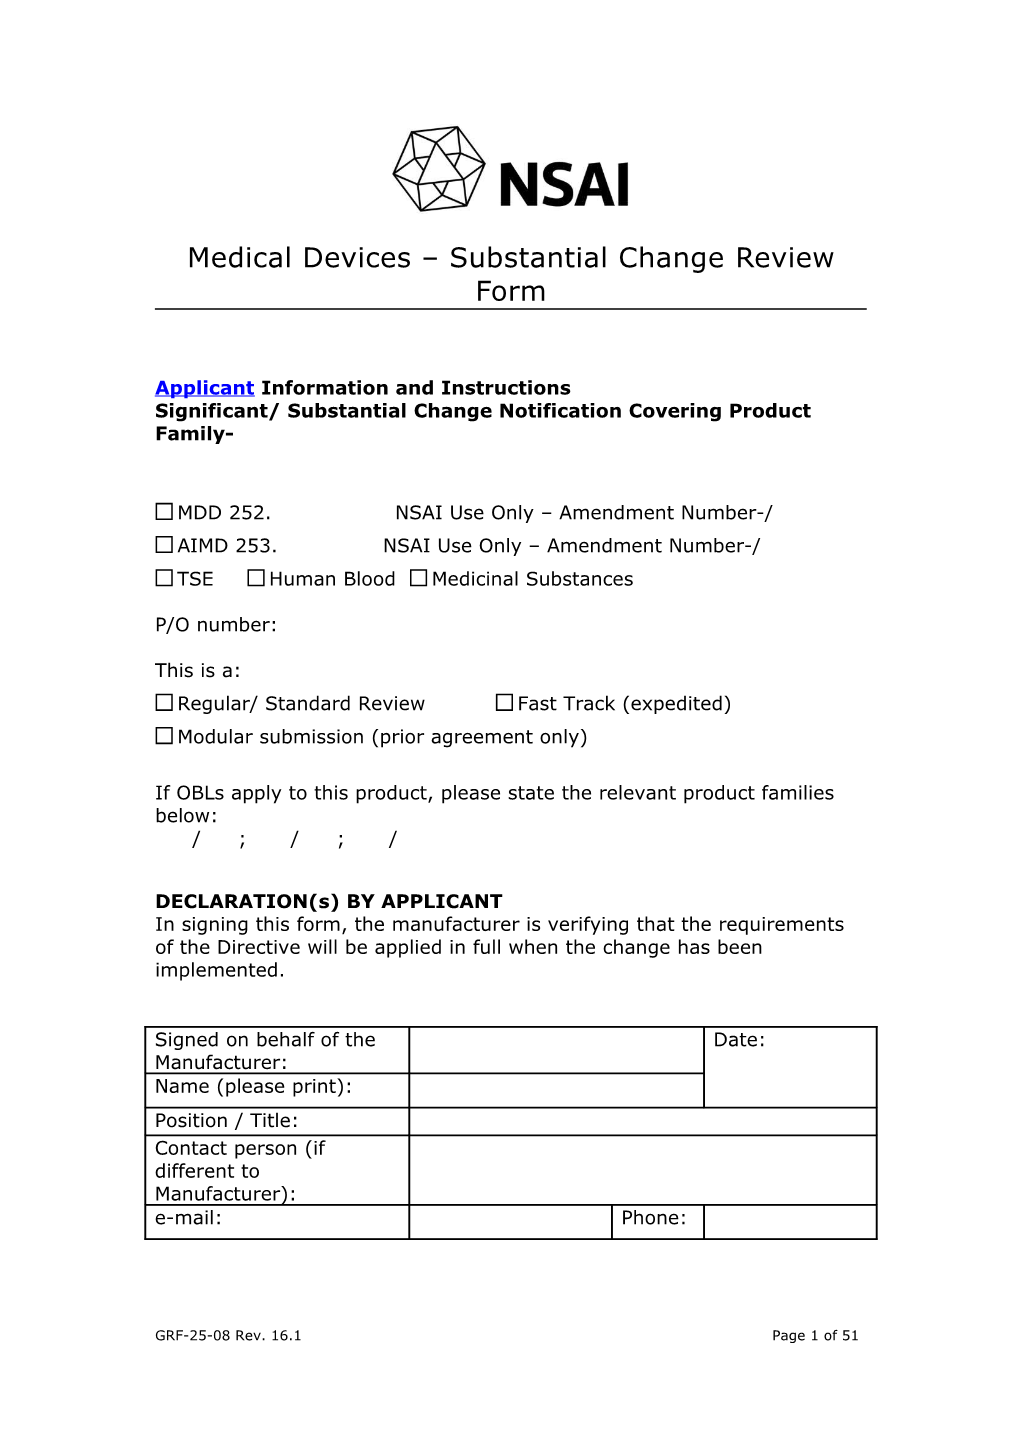 Medical Devices Substantial Change Review Form